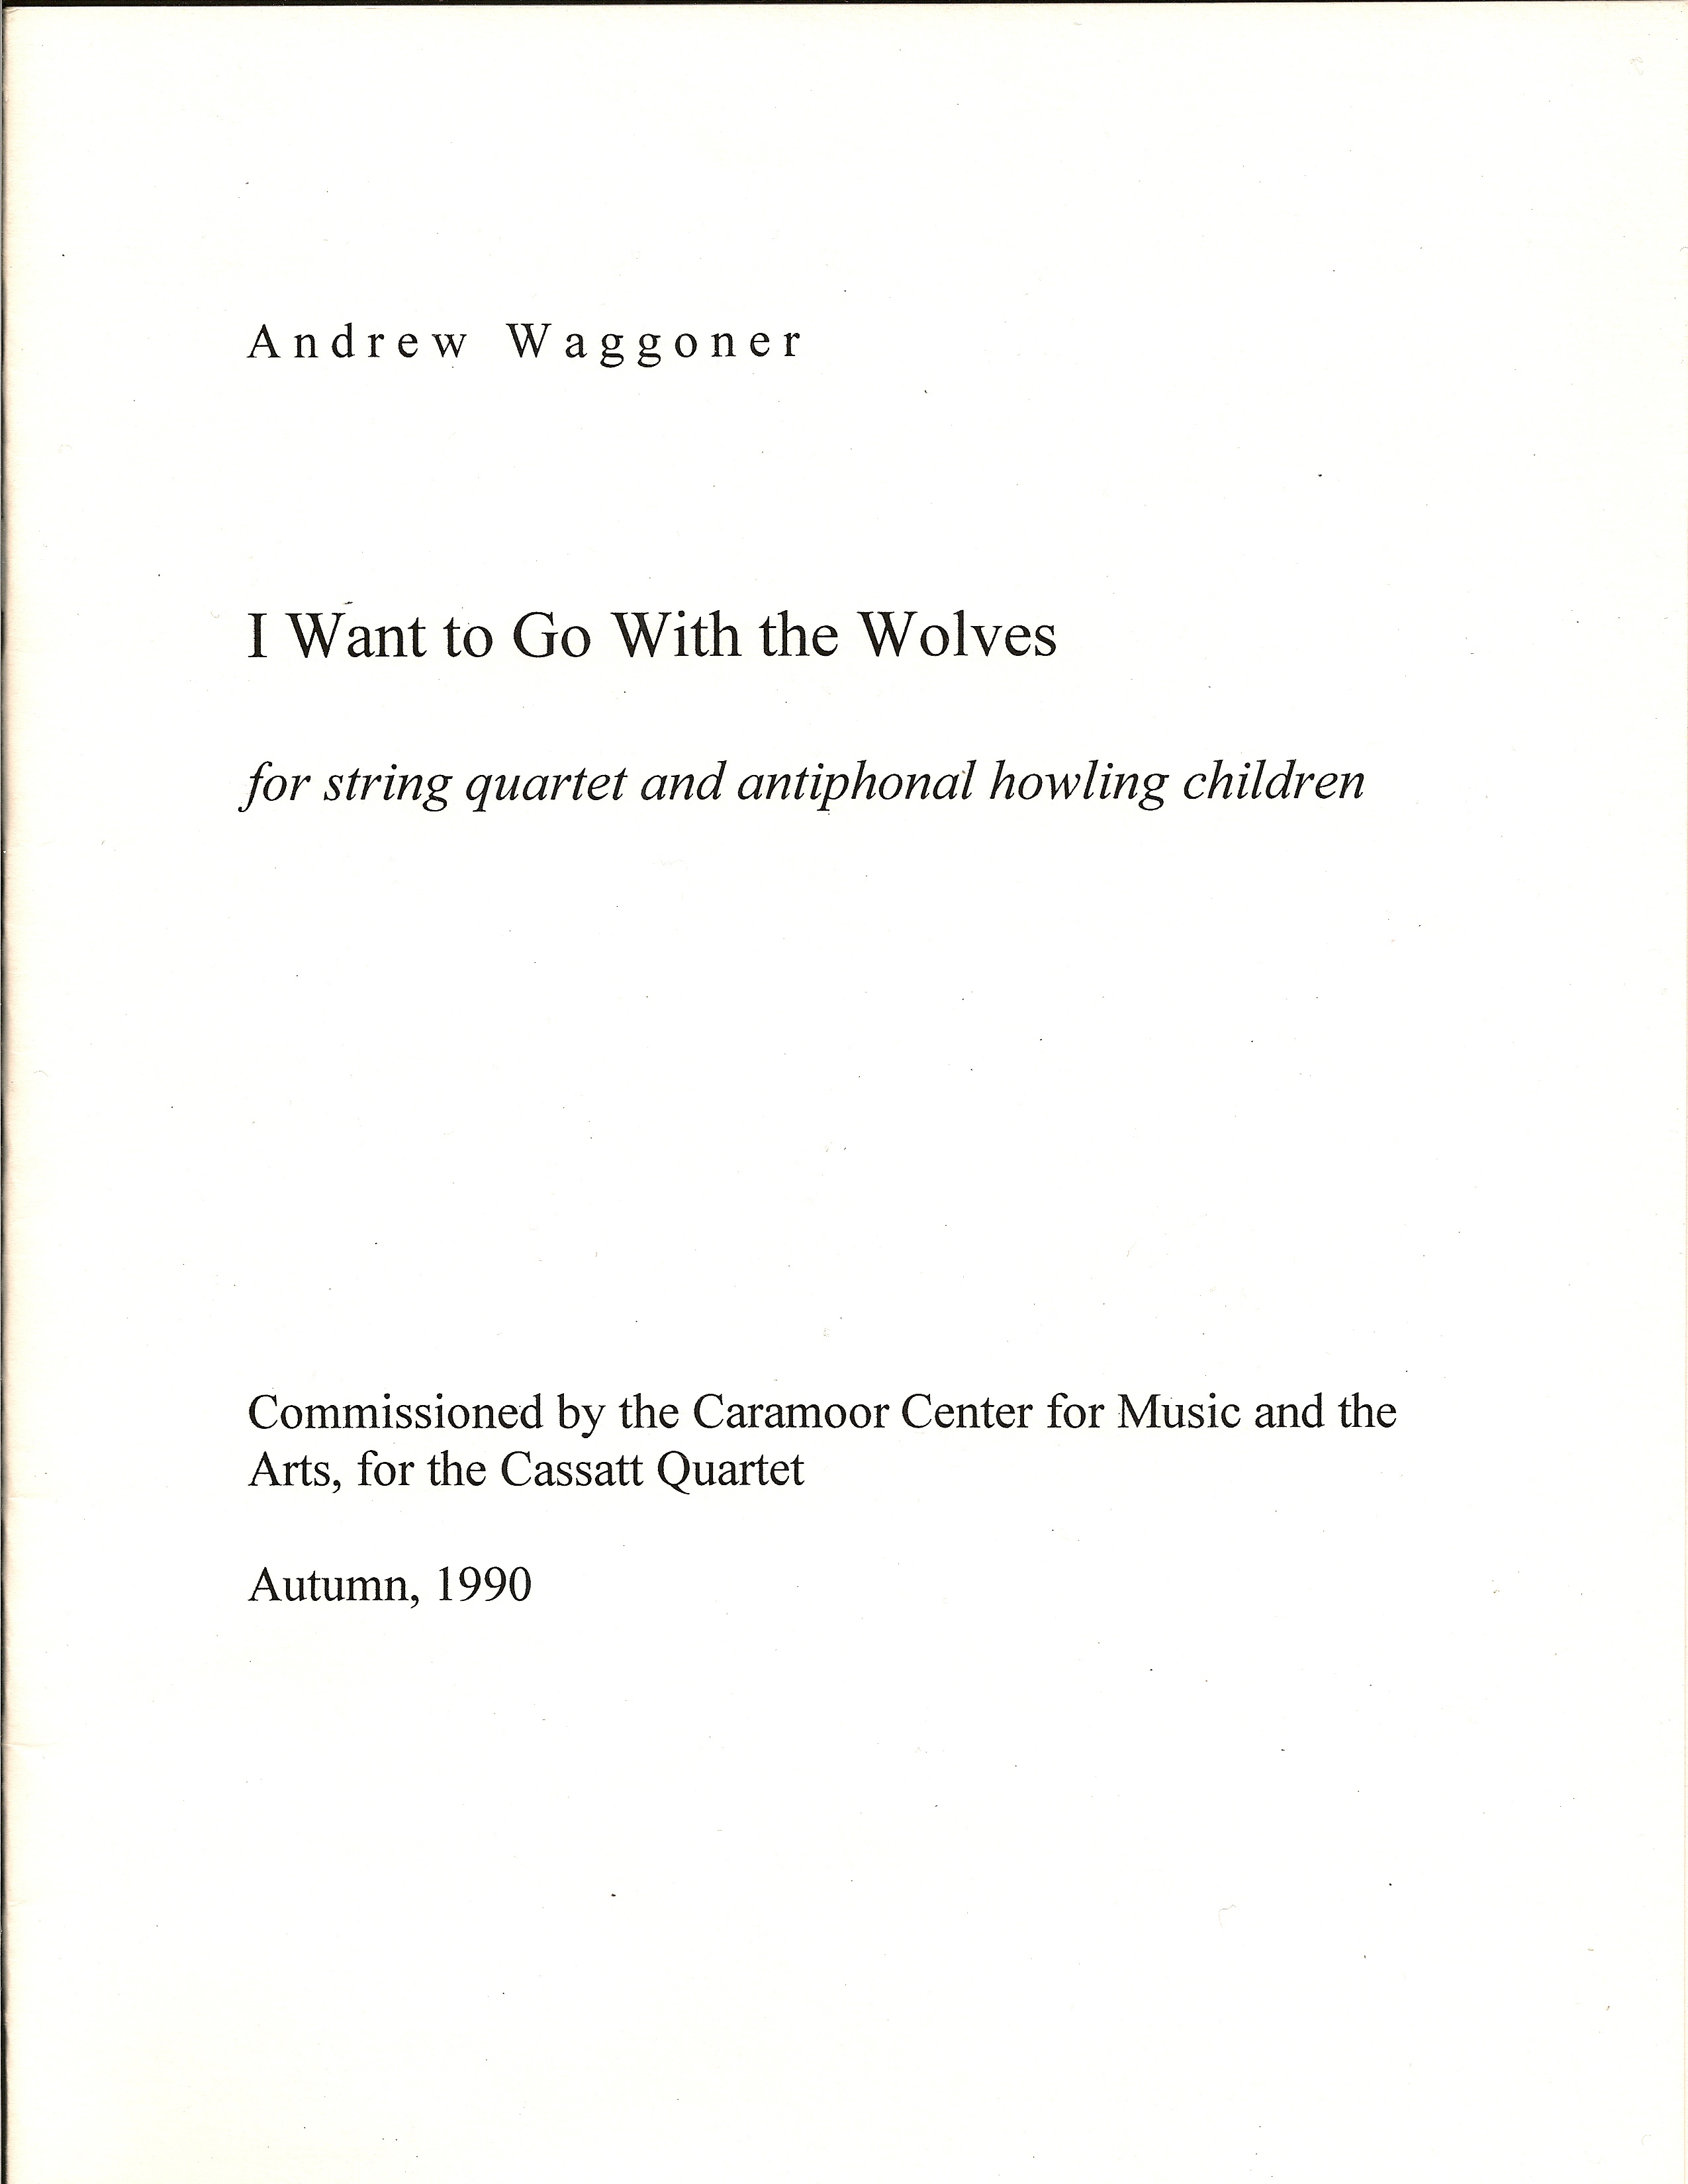 I Want to Go With the Wolves for String Quartet and antiphonal howling children